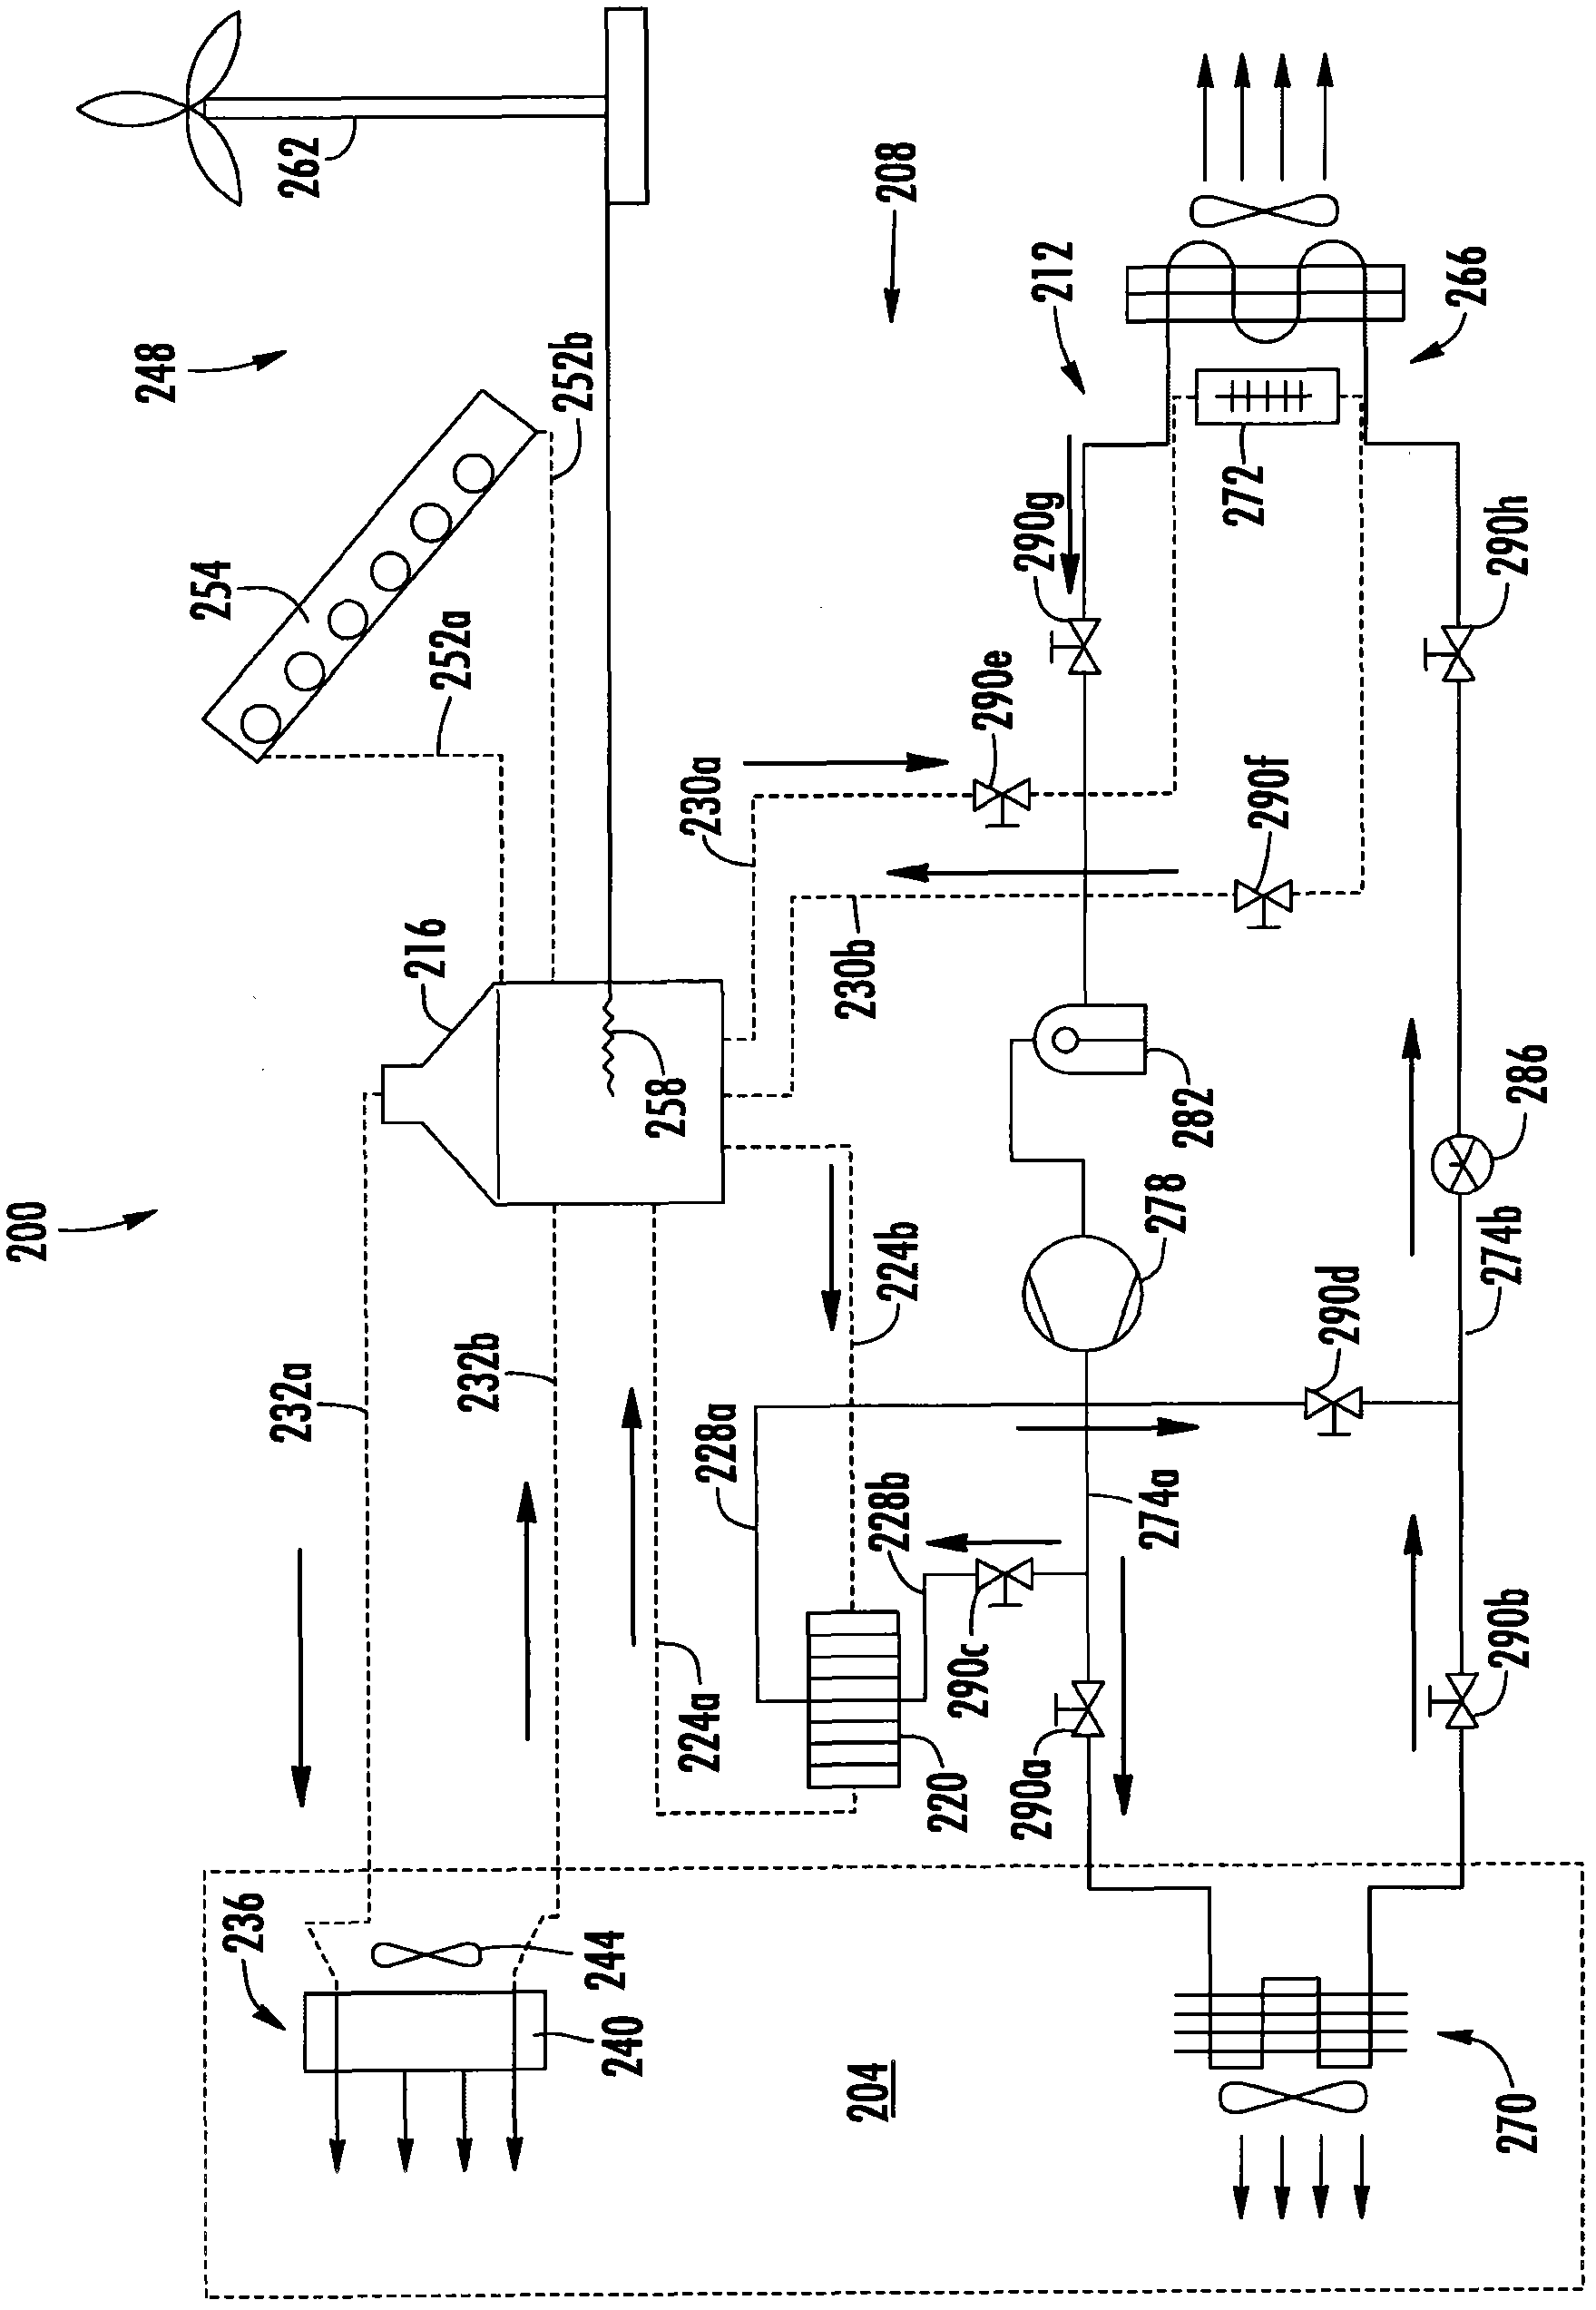 Device and method used for drying materials